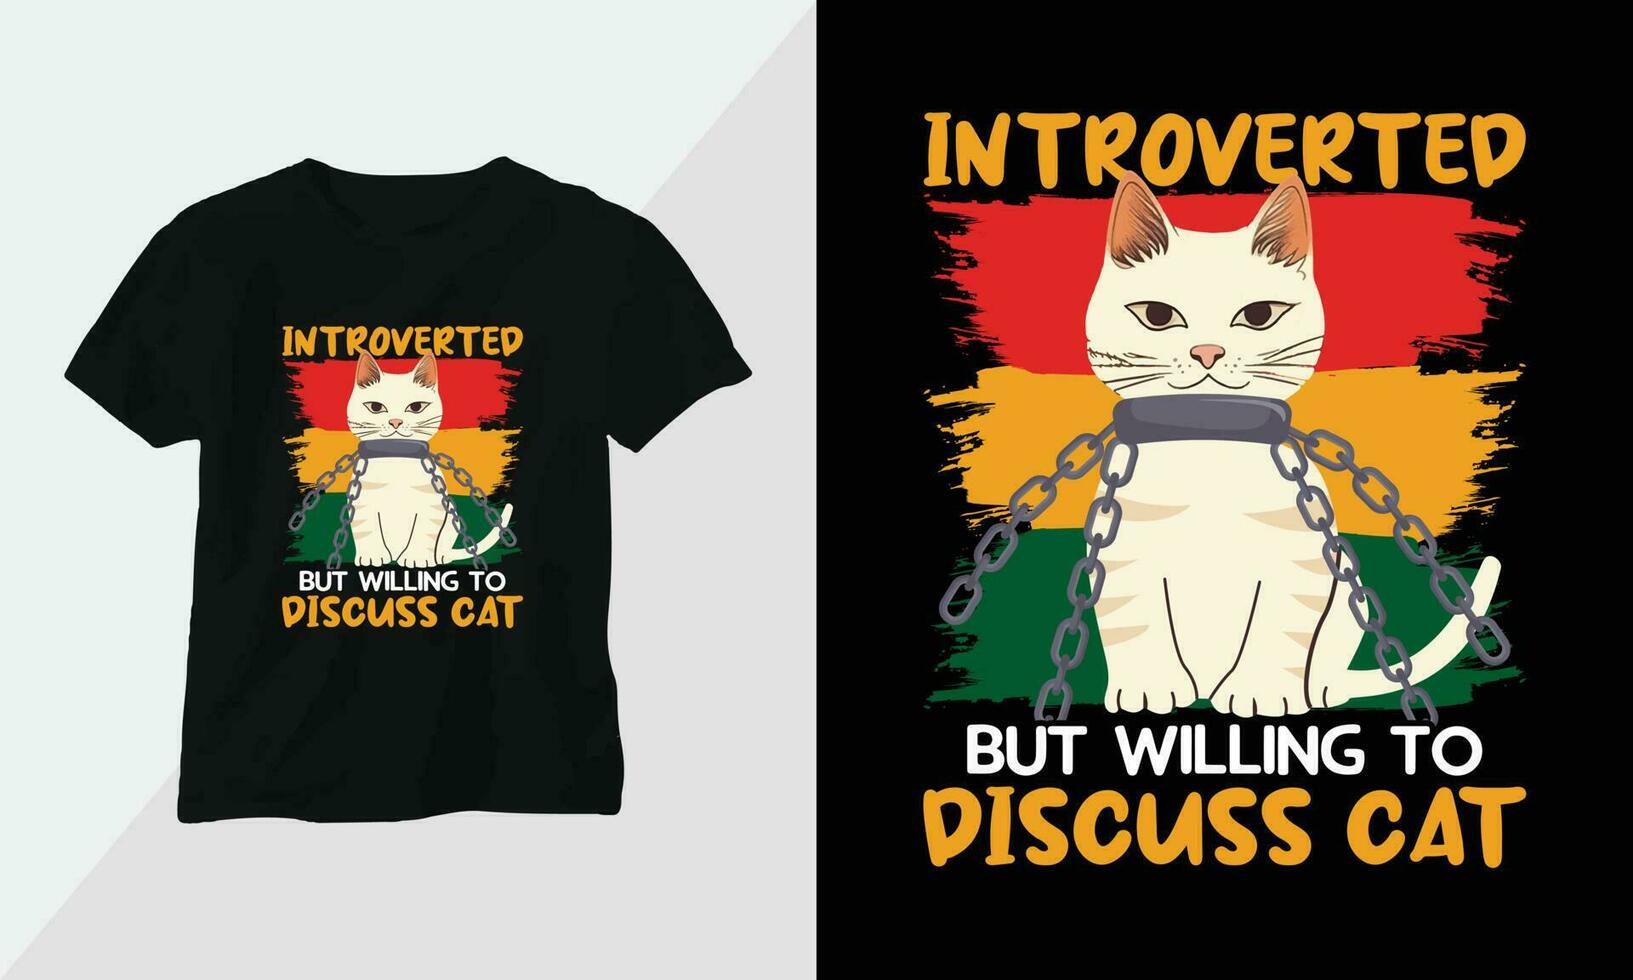 introverted but willing to discuss cats - Cat T-shirt and apparel design. Vector print, typography, poster, emblem, festival